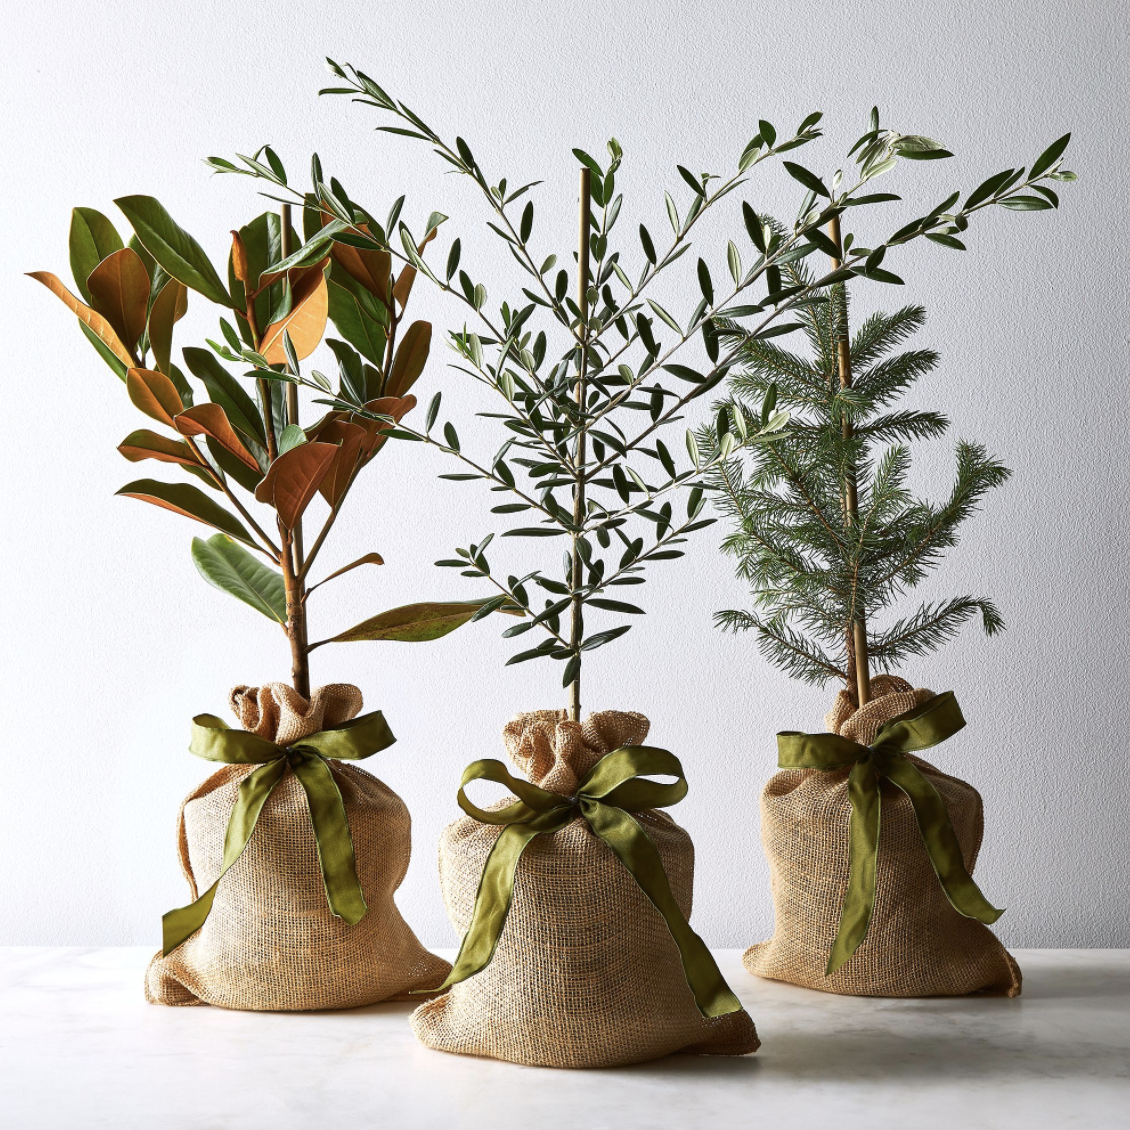 Image via Food52, which sells beautiful trees as well!